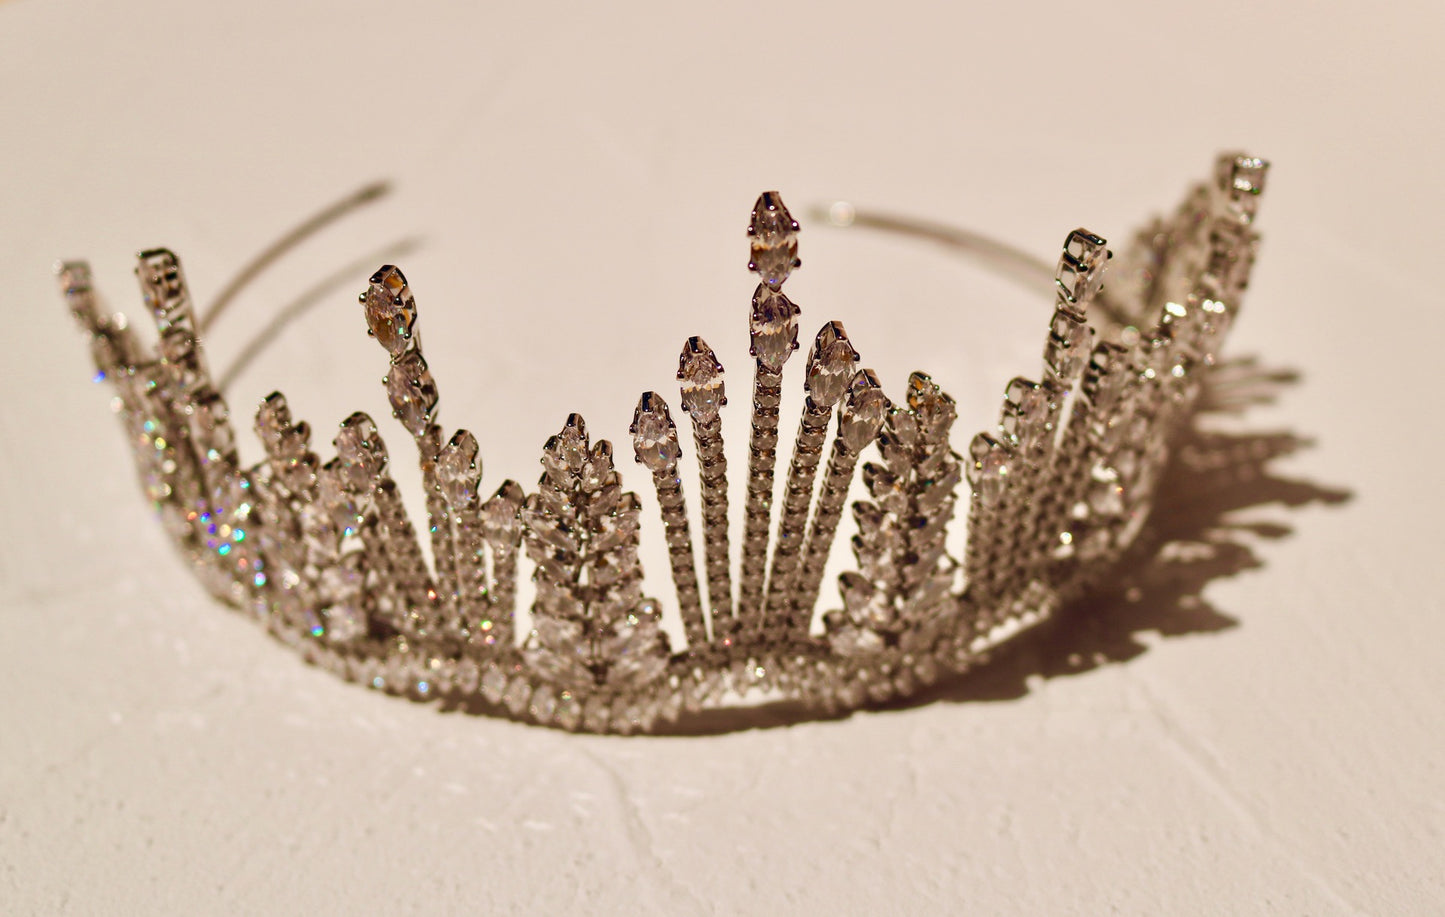 The Queens Crown